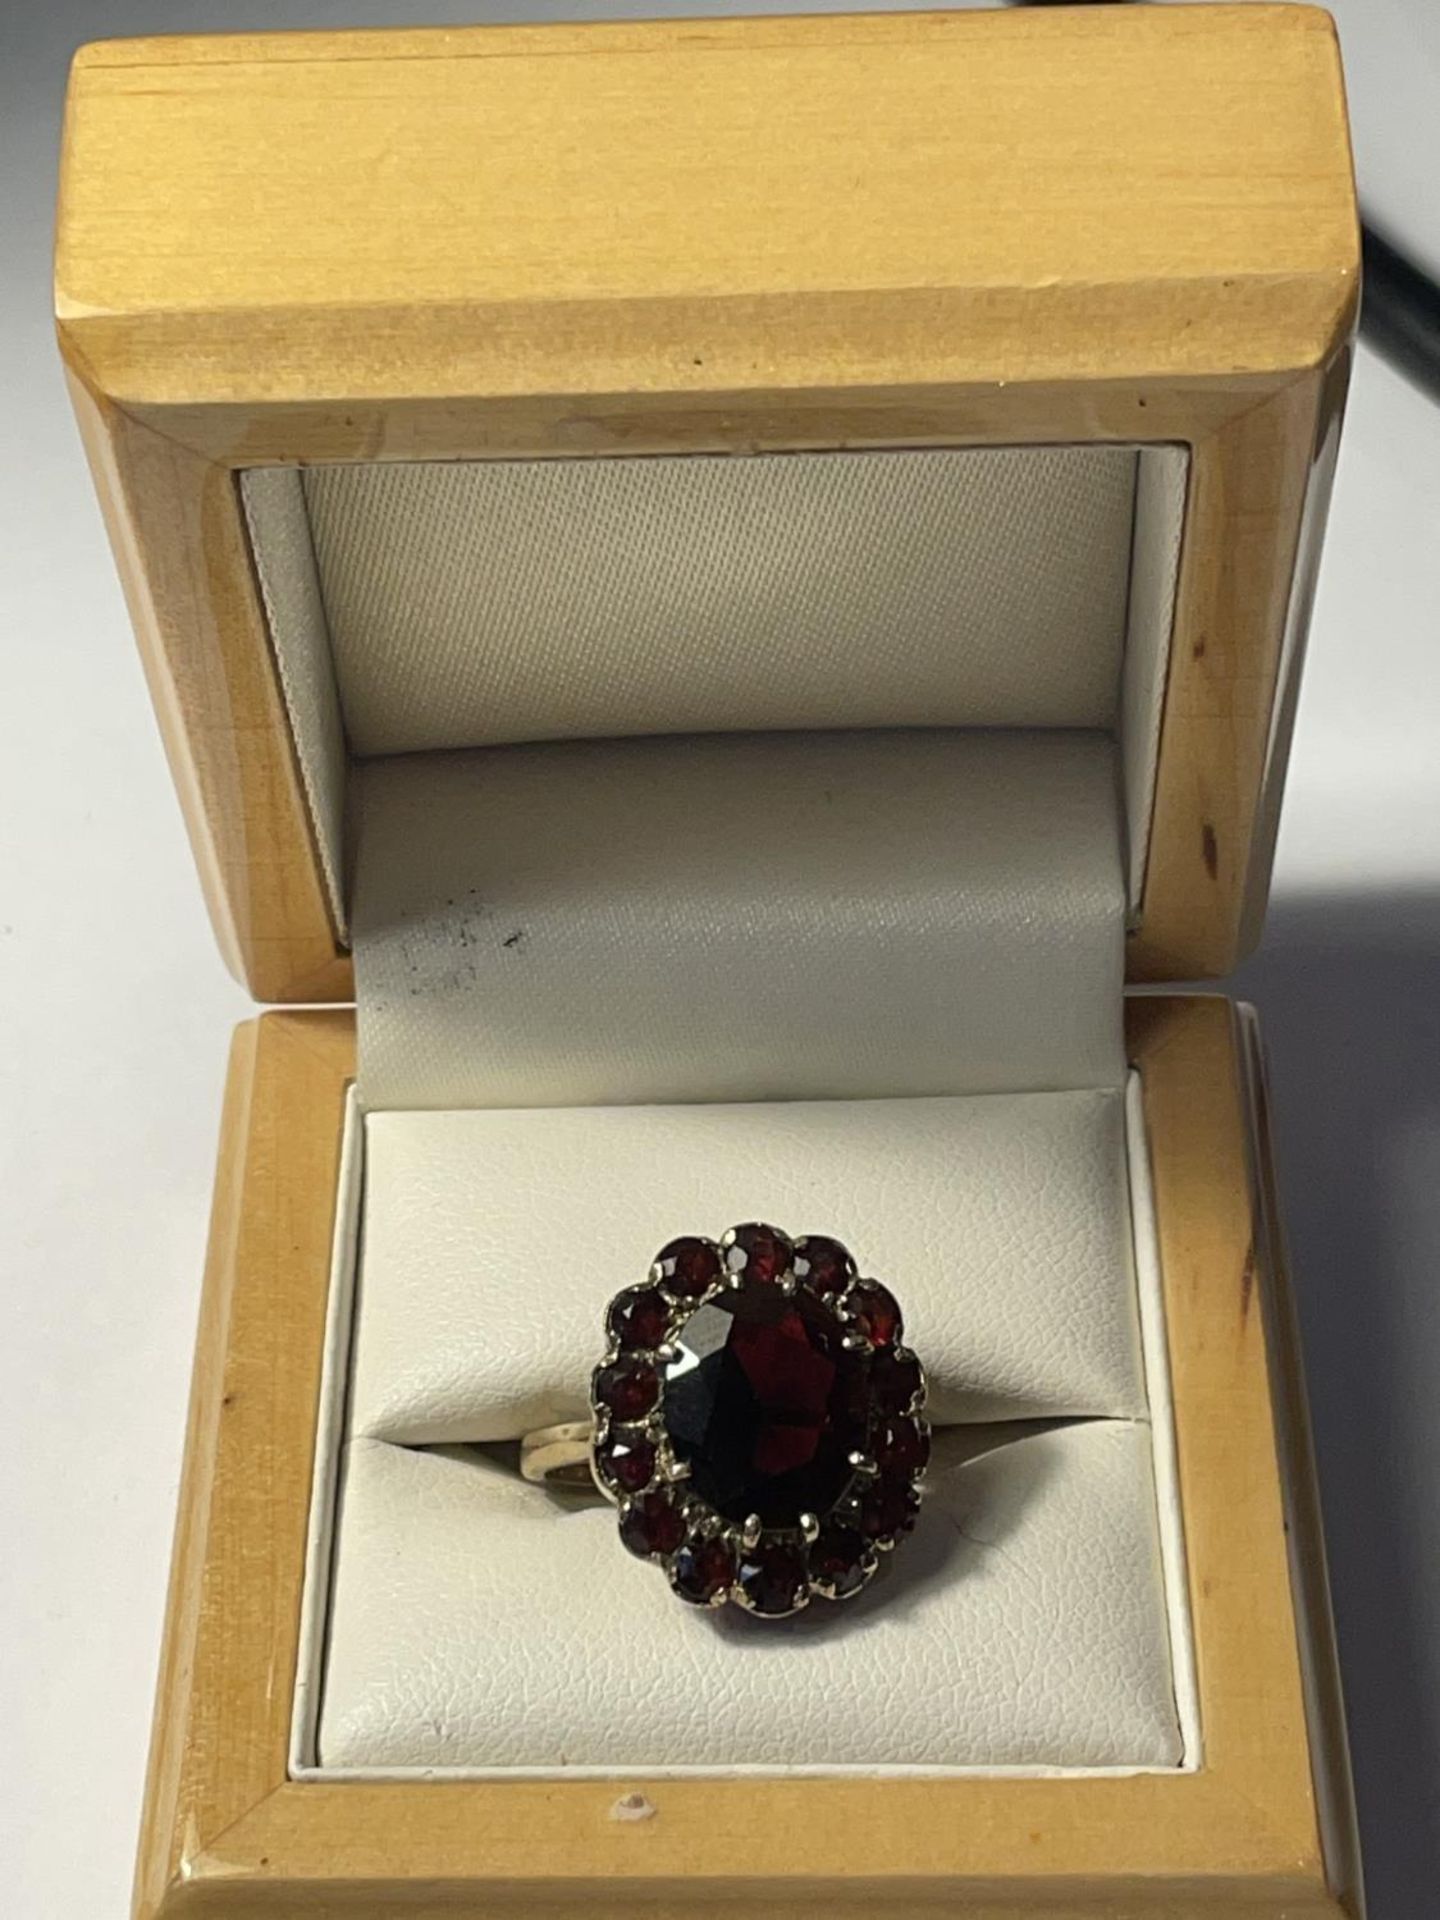 A 9CT YELLOW GOLD AND GARNET RING IN A FLOWER DESIGN SIZE P, WEIGHT 5.46 GRAMS